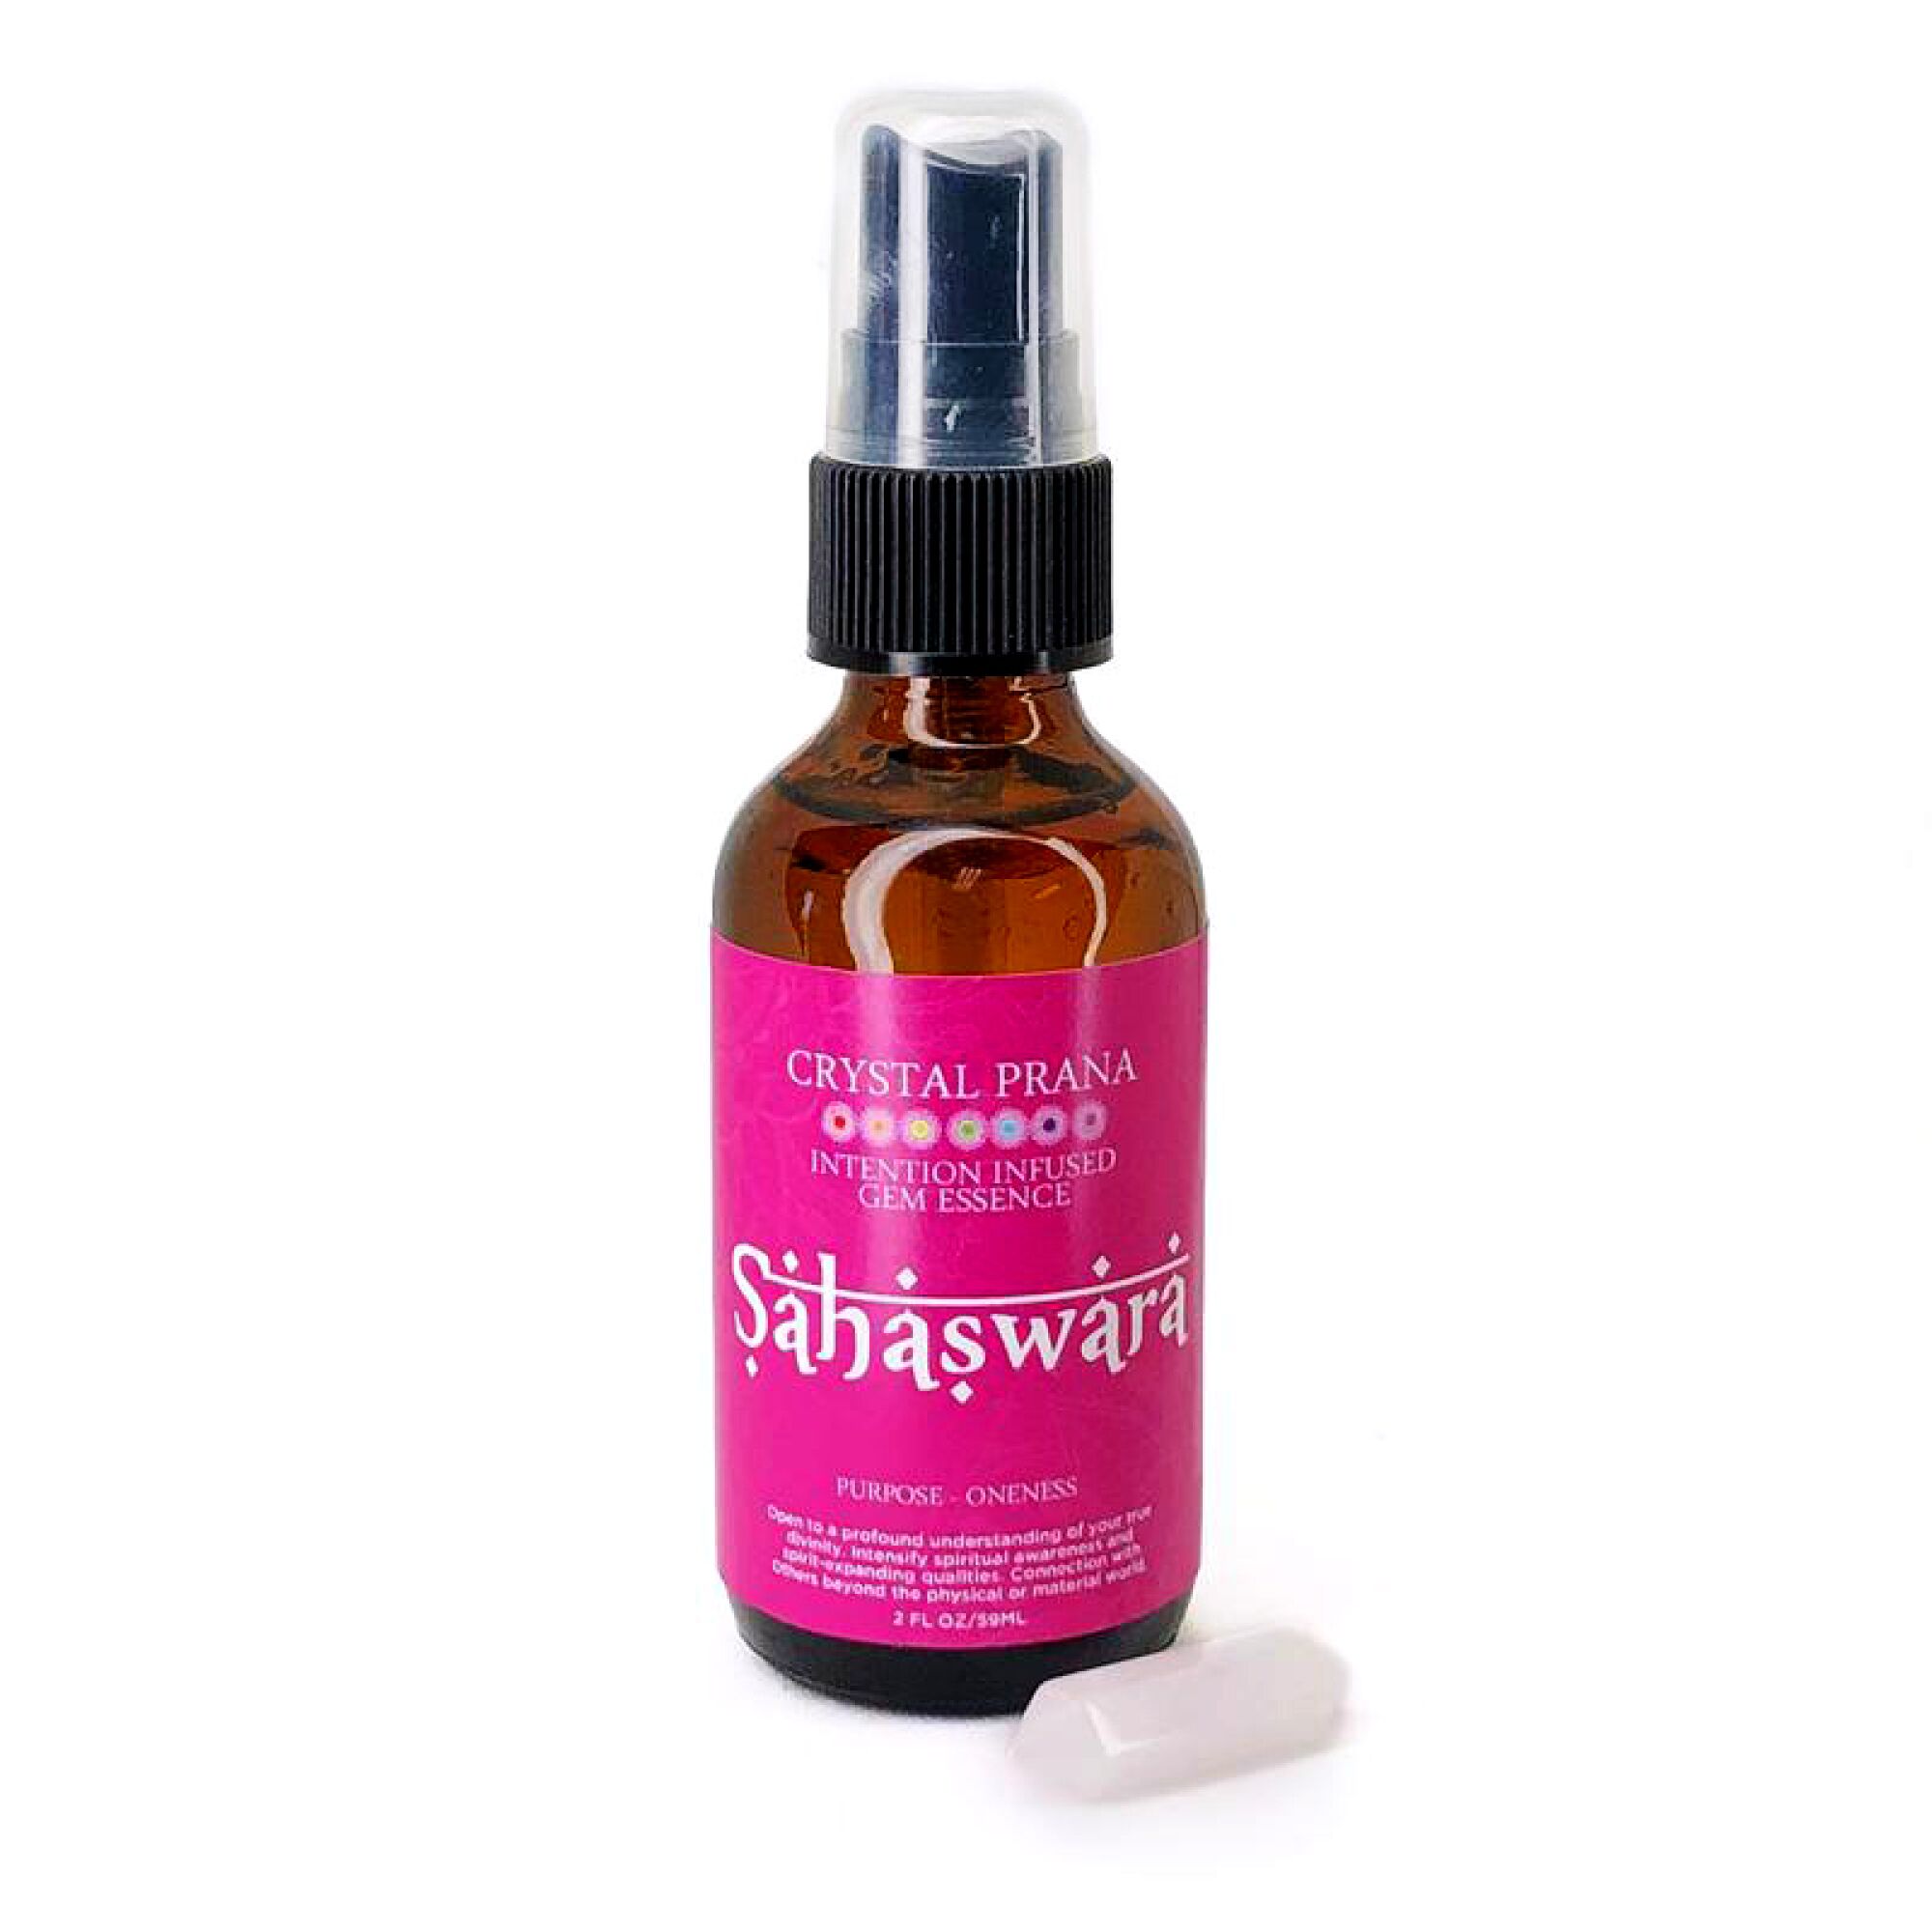 A bottle of Sahaswara room spray by Majestic Bliss.